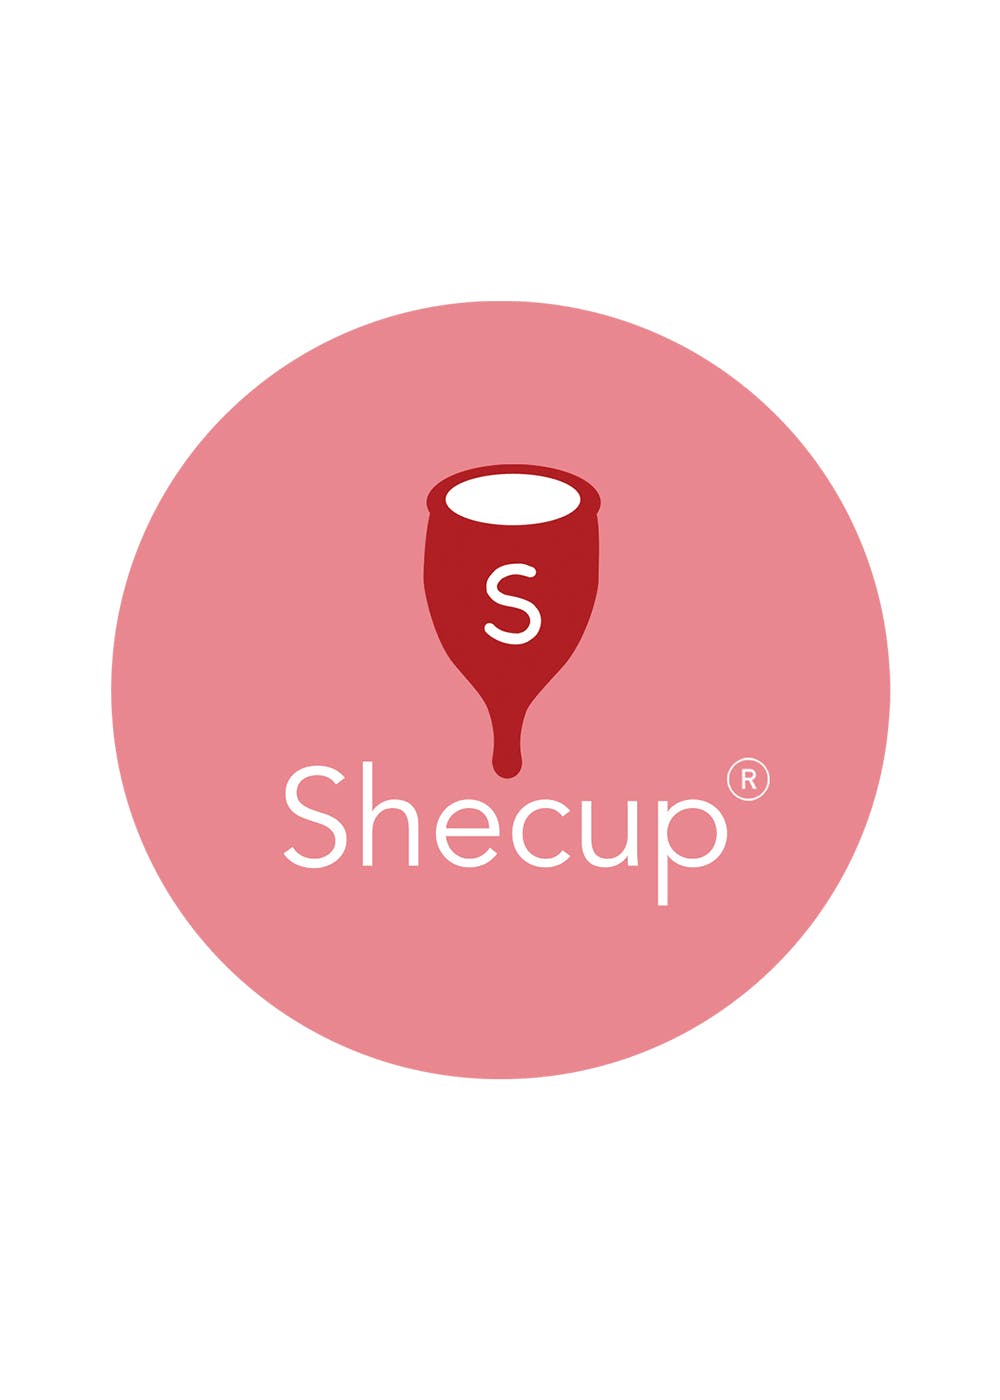 Shecup L (L = Longer Stem) – Recommended for New Users